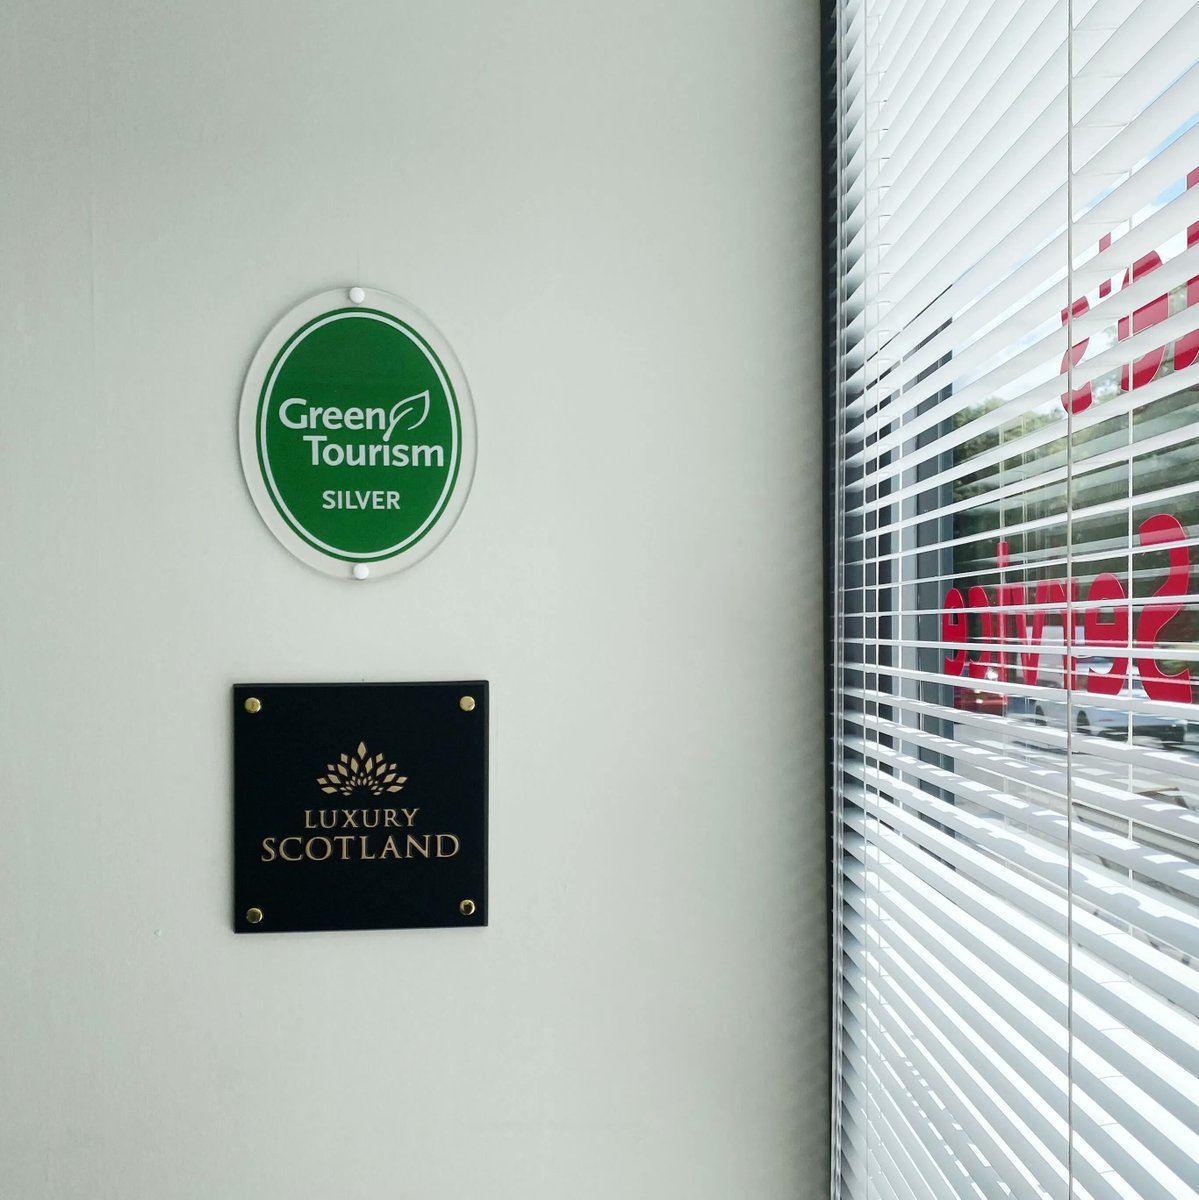 We received our @GreenTourism Award plaque and here it is, looking very handsome beside @luxuryscotland, in our Glasgow office. We were thrilled to be awarded Silver earlier this year in recognition of our #sustainable approach to business. Read more here: buff.ly/3uxksxQ